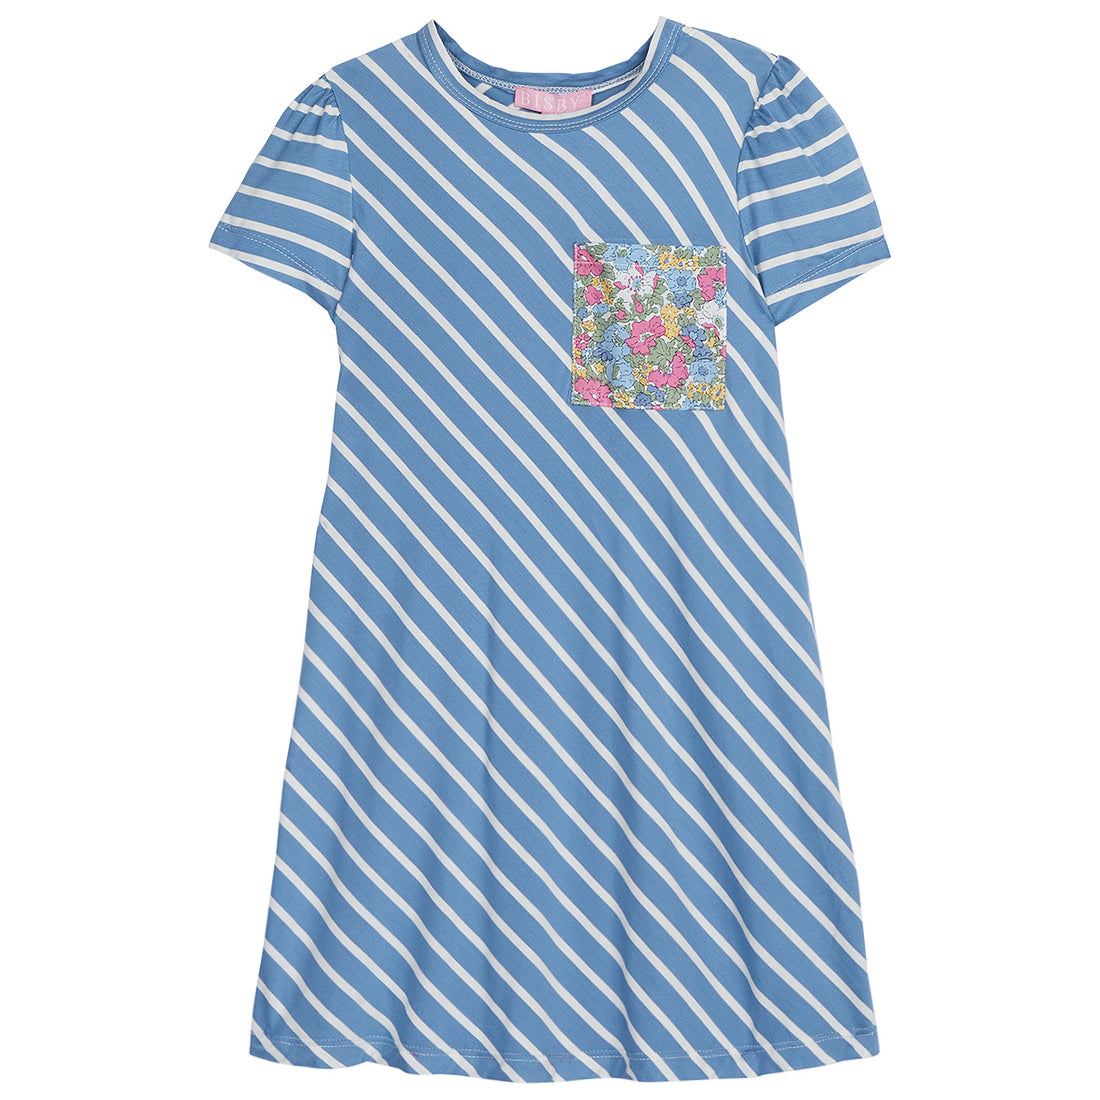 Blue and white striped short sleeve dress with a pocket on left side with bright floral pattern on it--EverydayDress for girls/teens BISBY